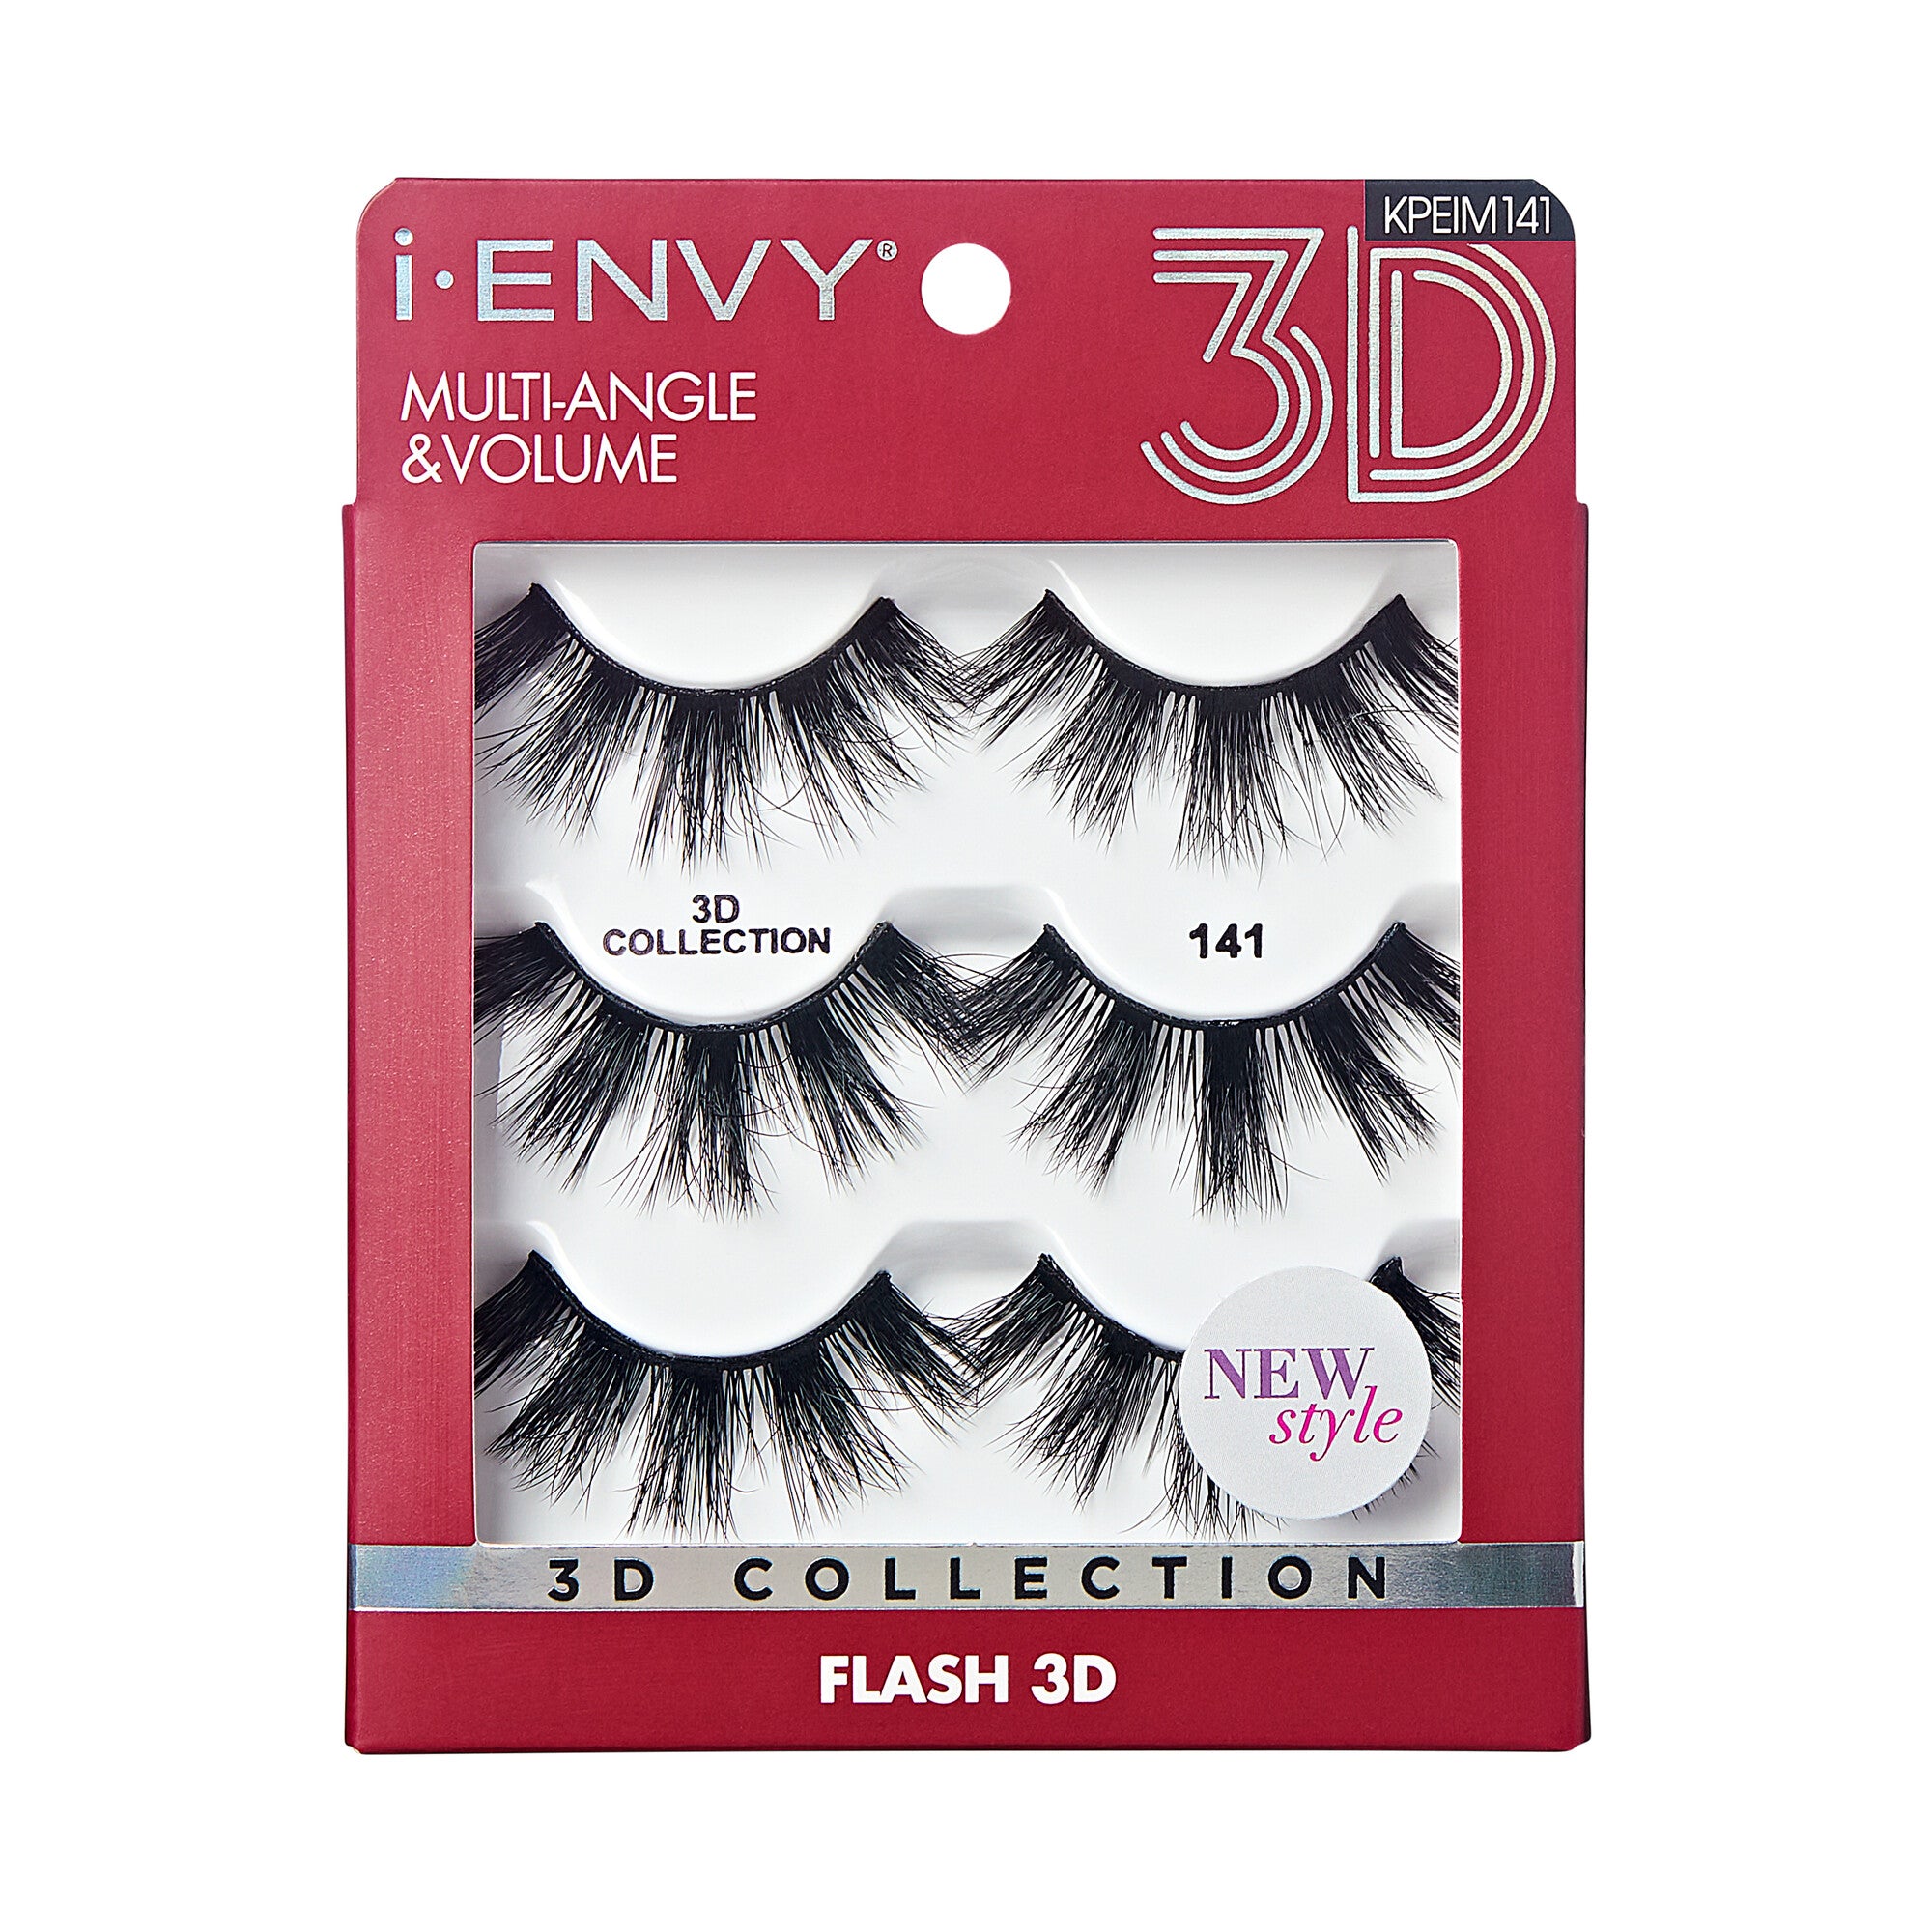 I.Envy By Kiss 3D Lashes Multi Pack Multiangle & Volume Collection-141 (KPEIM141)